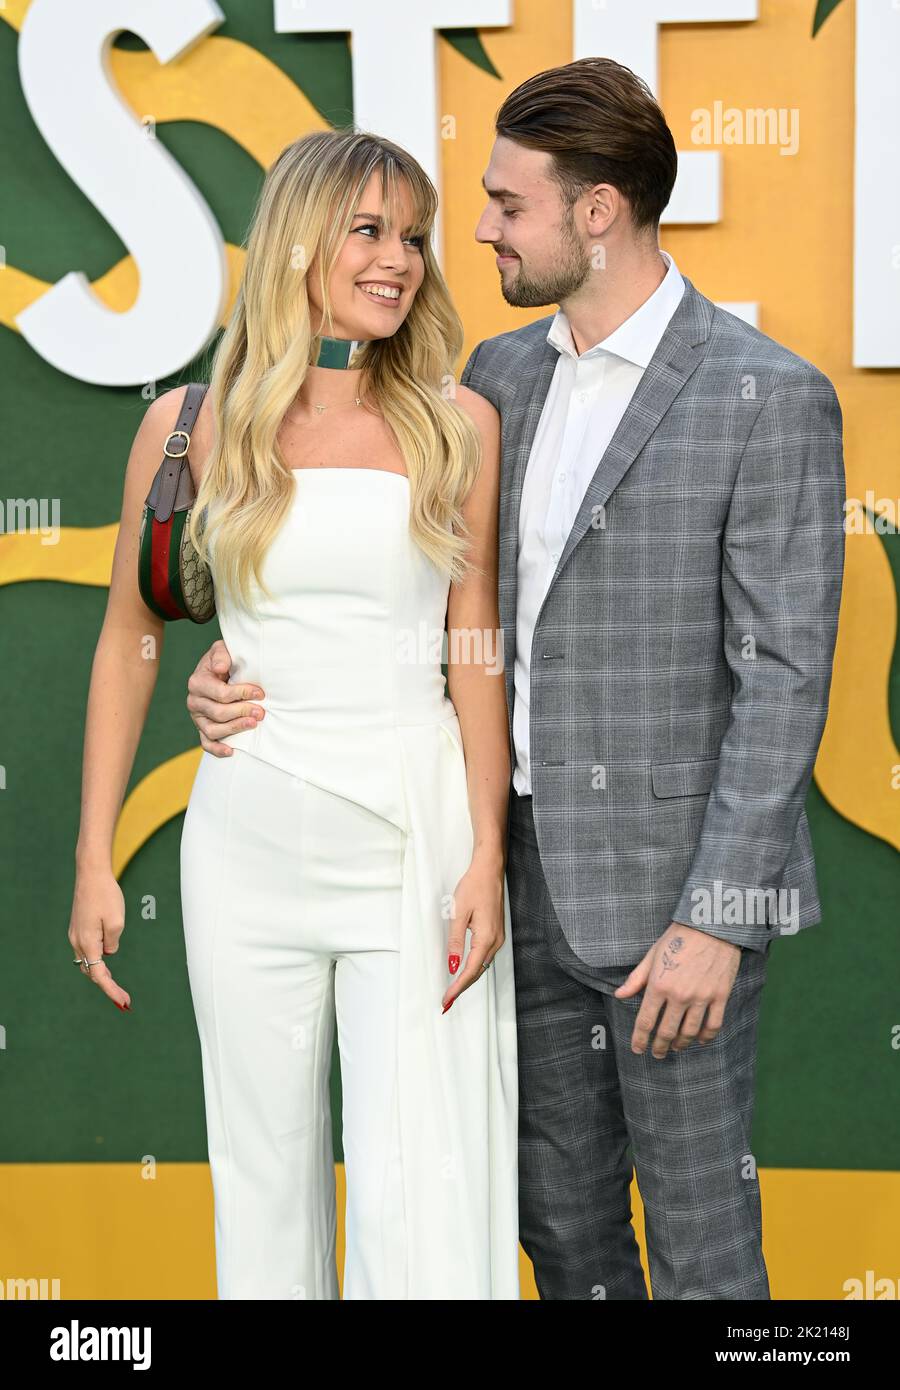 21.. September 2022. London, Großbritannien. Tasha Ghouri und Andrew Le Page bei der Premiere in Amsterdam, Odeon Luxe, Leicester Square, London. Quelle: Doug Peters/EMPICS/Alamy Live News Stockfoto